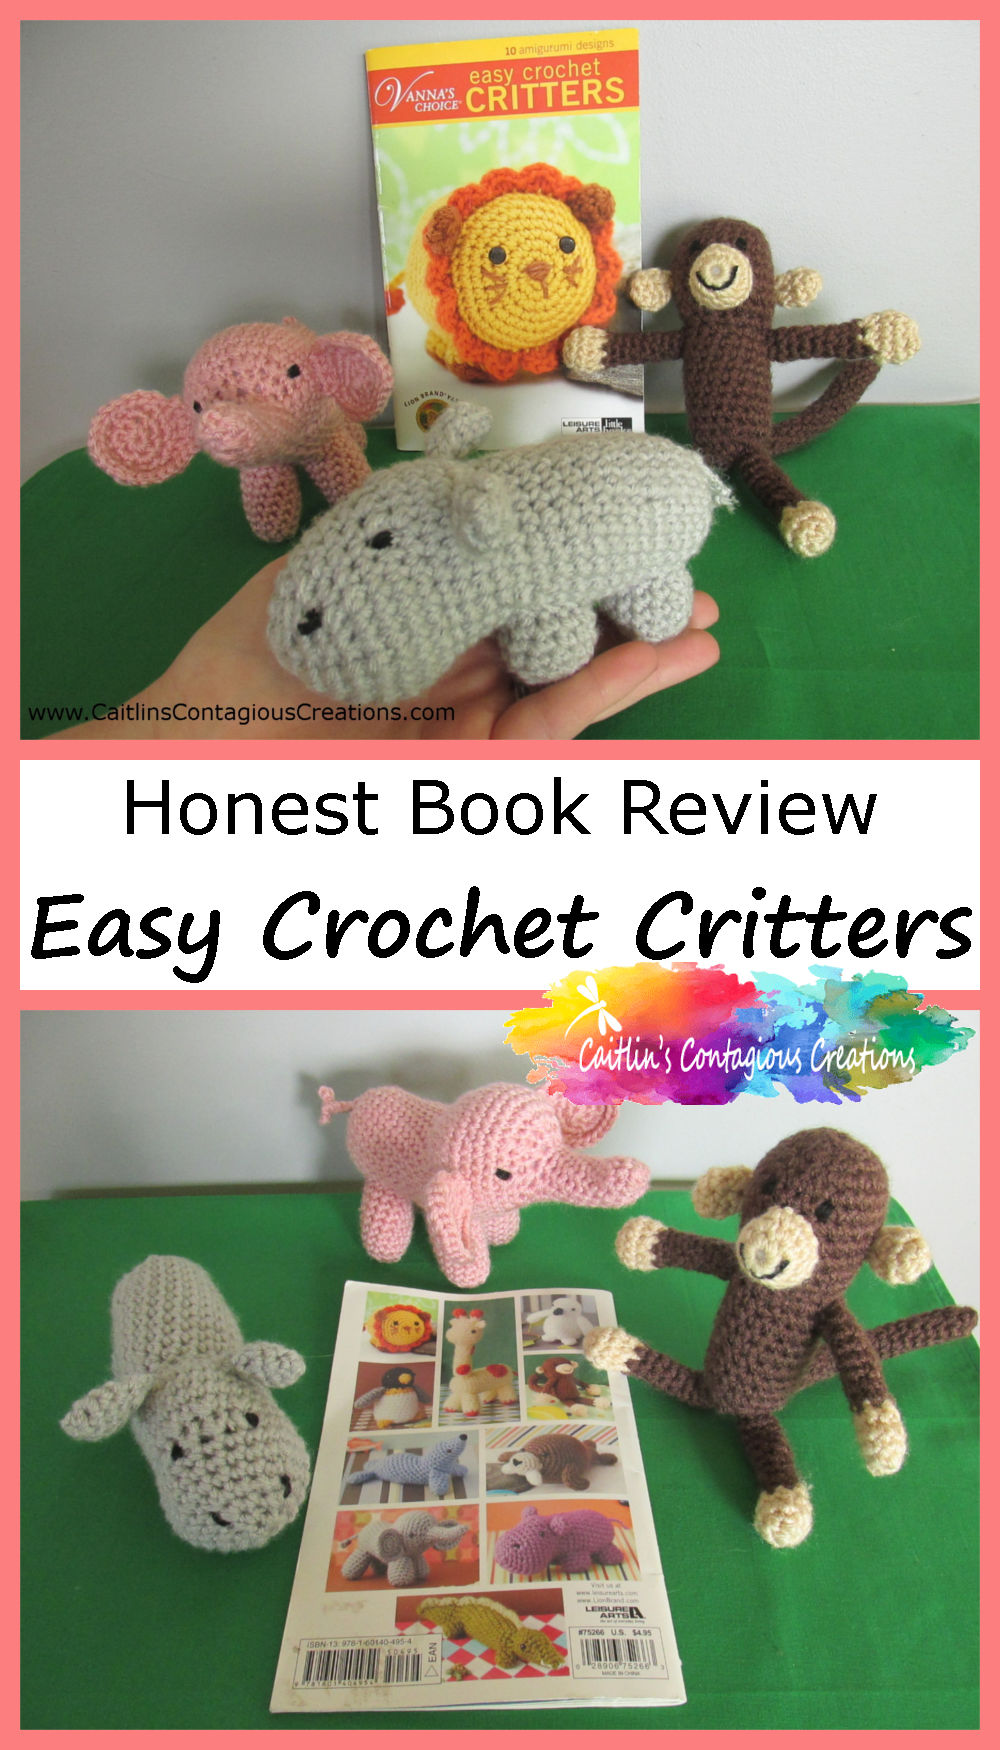 Easy Crochet Critters book and amigurumi animals with text overlay "Honest Book Review of Easy Crochet Critters"